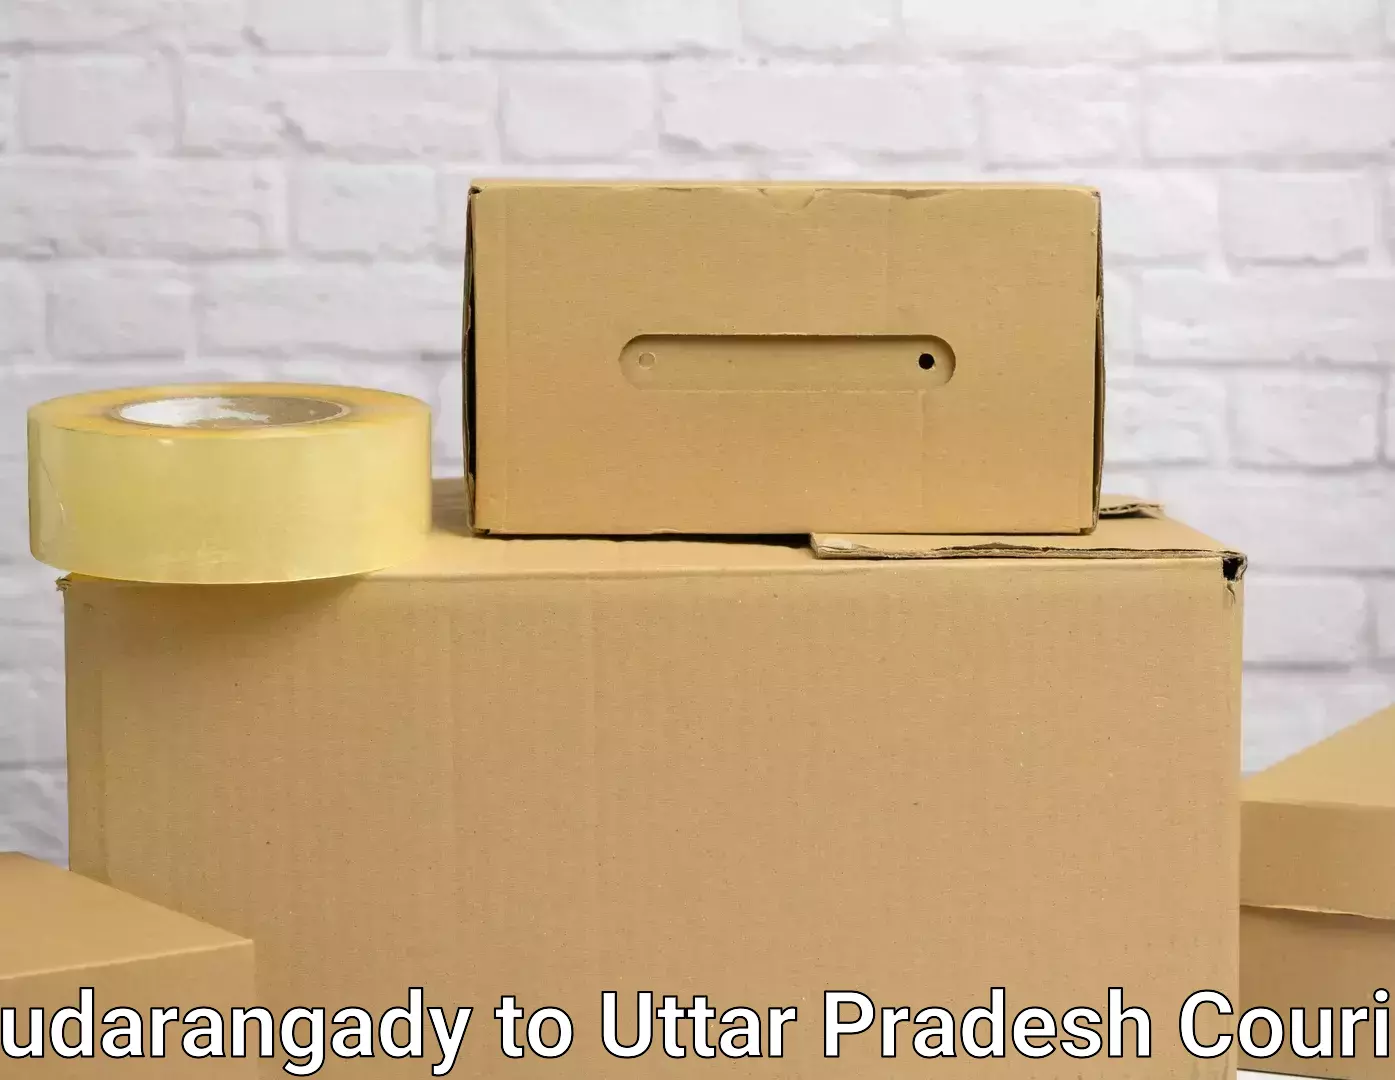 Home moving specialists Mudarangady to Rampur